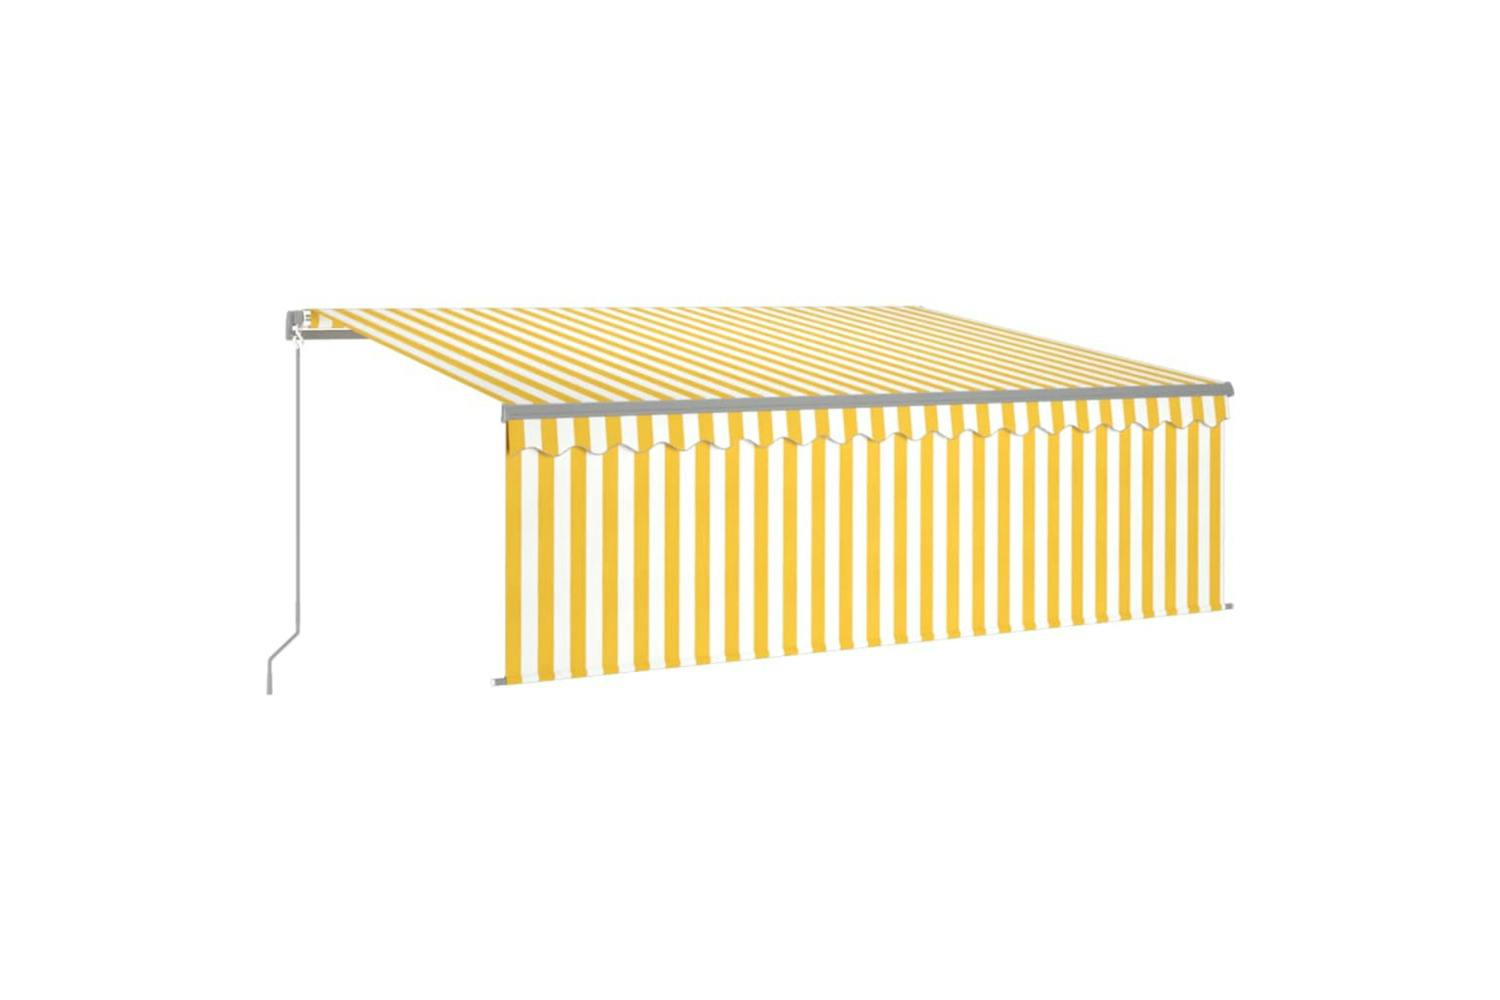 Vidaxl 3069443 Manual Retractable Awning With Blind&led 4.5x3m Yellow&white